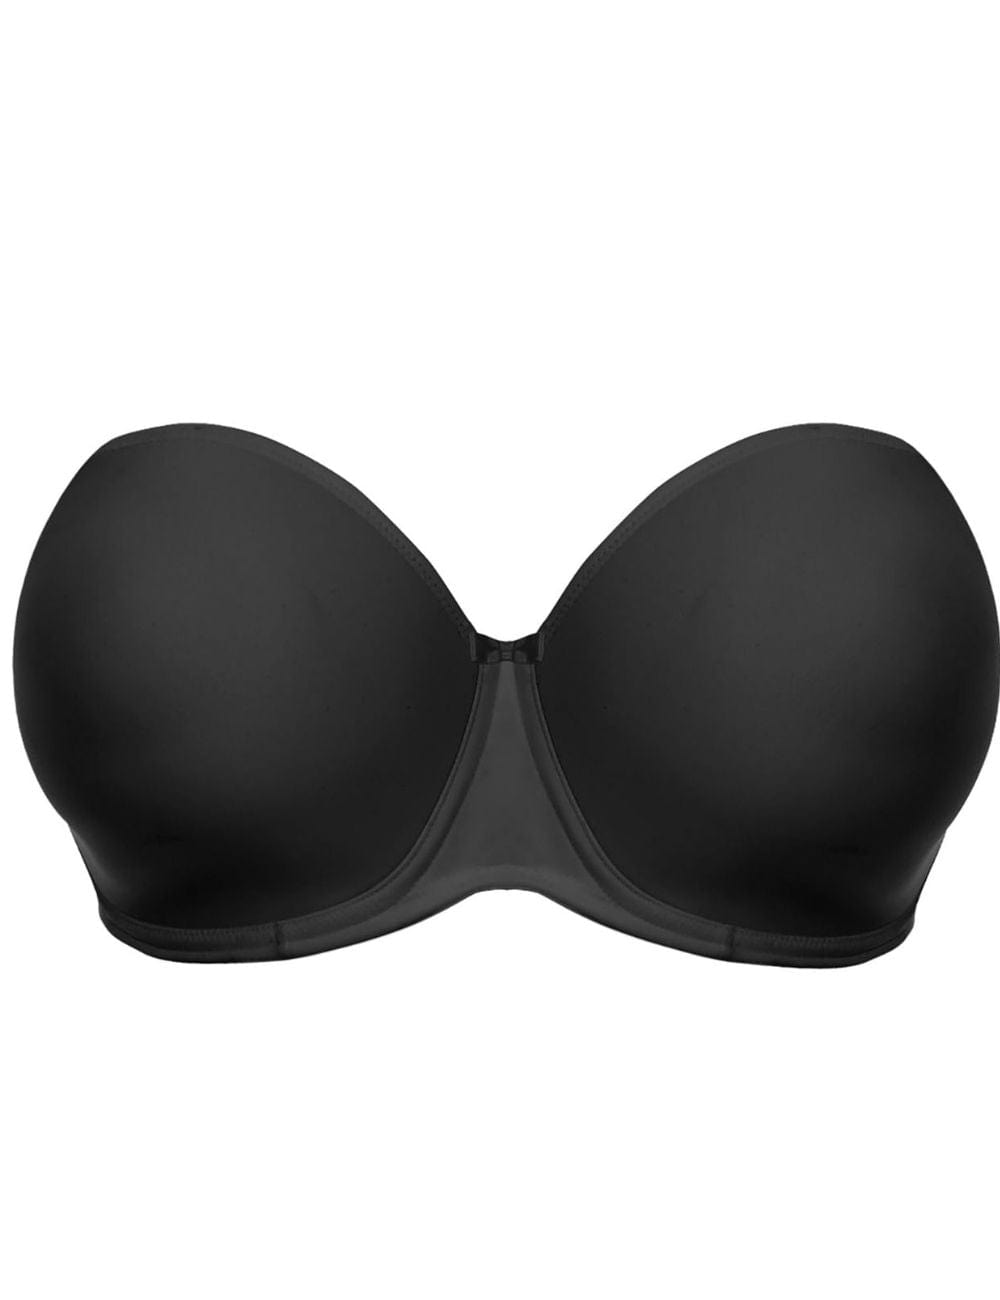 Ulla Meghan Moulded Smooth Foam Cup Underwire Bra (Black) – LES